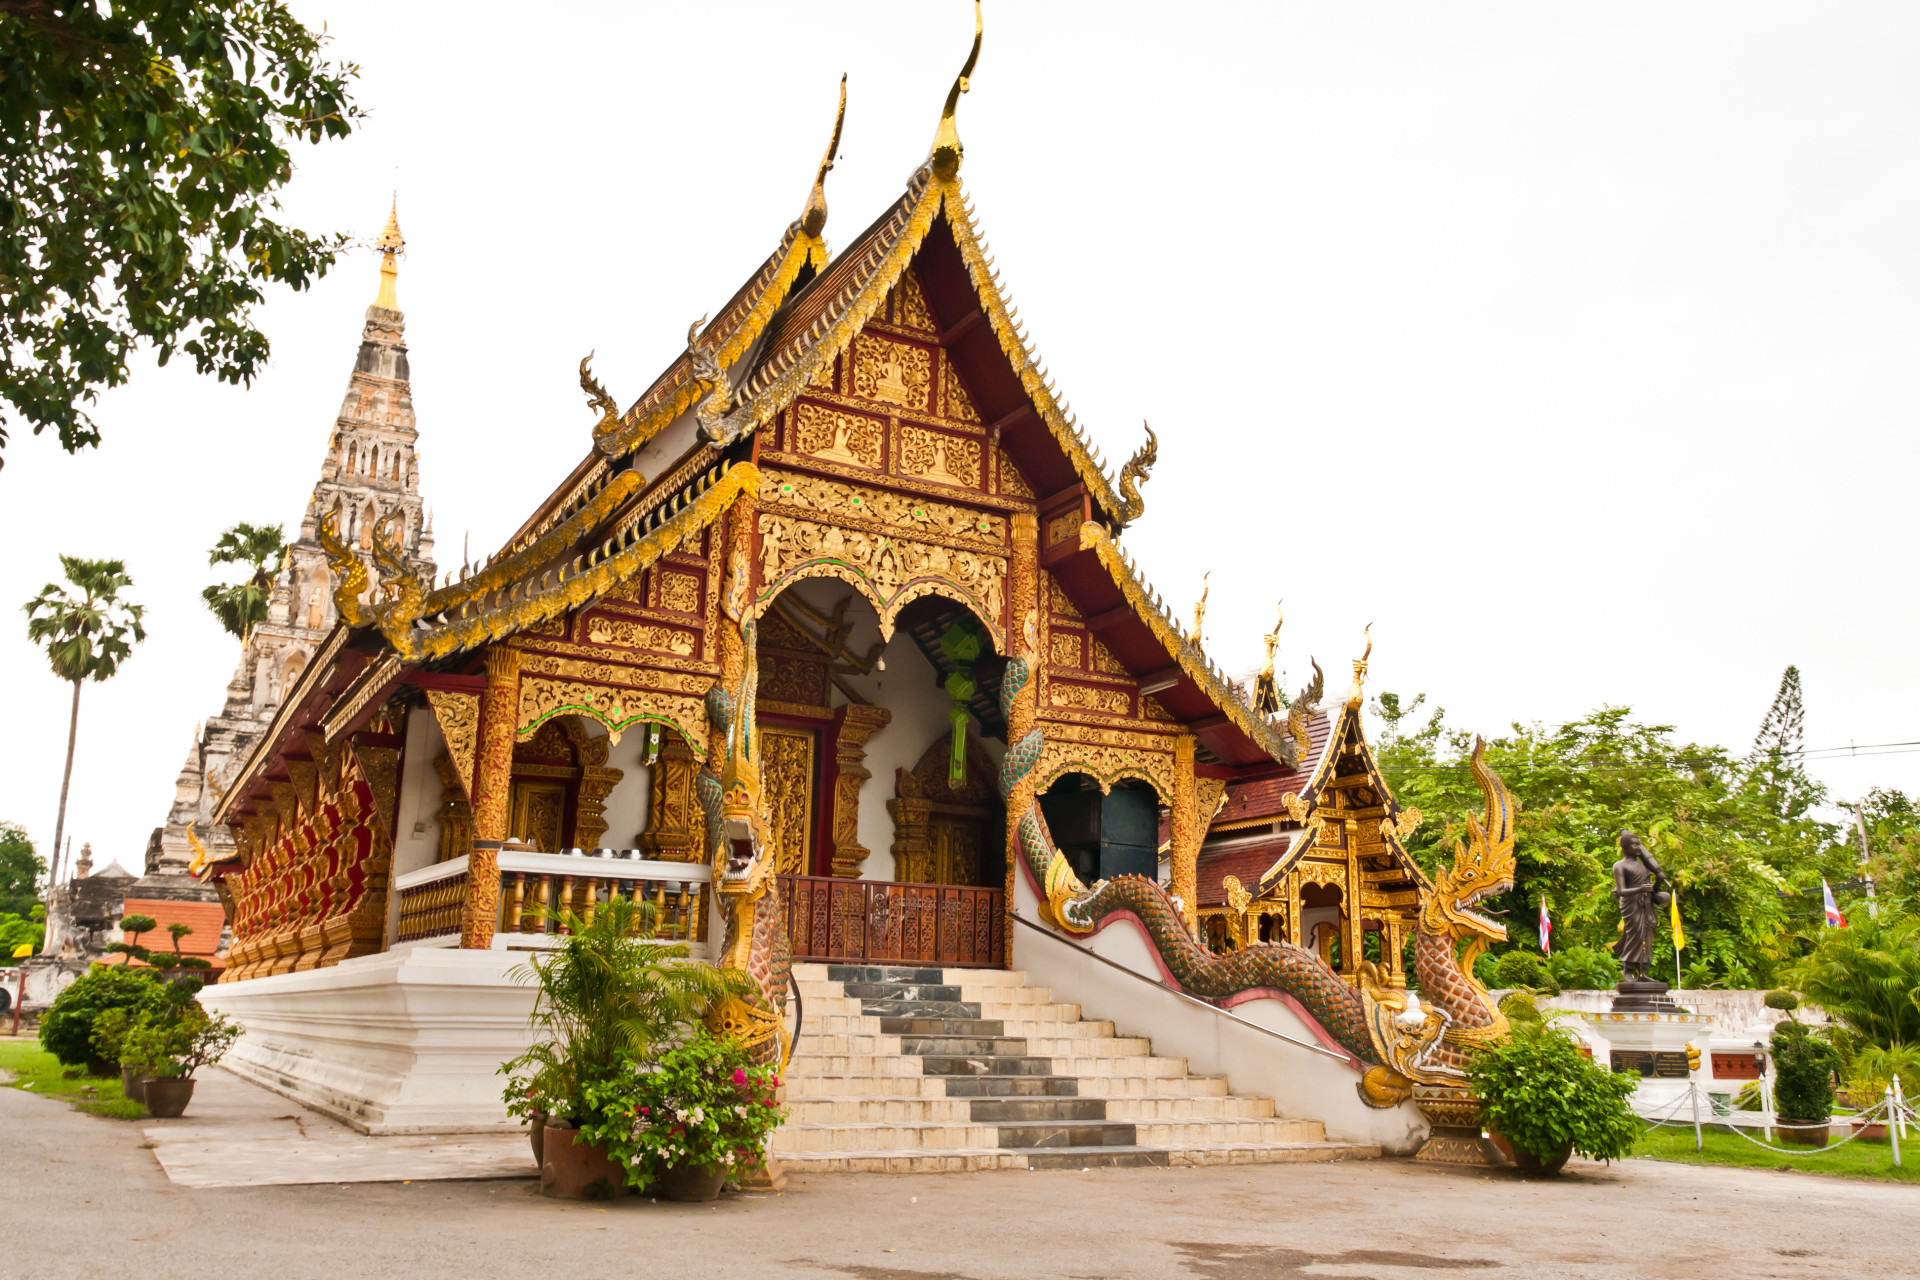 You will no doubt come across the marvelous Wat Chedi Luang, a Buddhist temple and one of the city's main attractions.<p>You may also like:<a href="https://www.starsinsider.com/n/329256?utm_source=msn.com&utm_medium=display&utm_campaign=referral_description&utm_content=208346v2en-sg"> Celebrities who tragically lost their children</a></p>